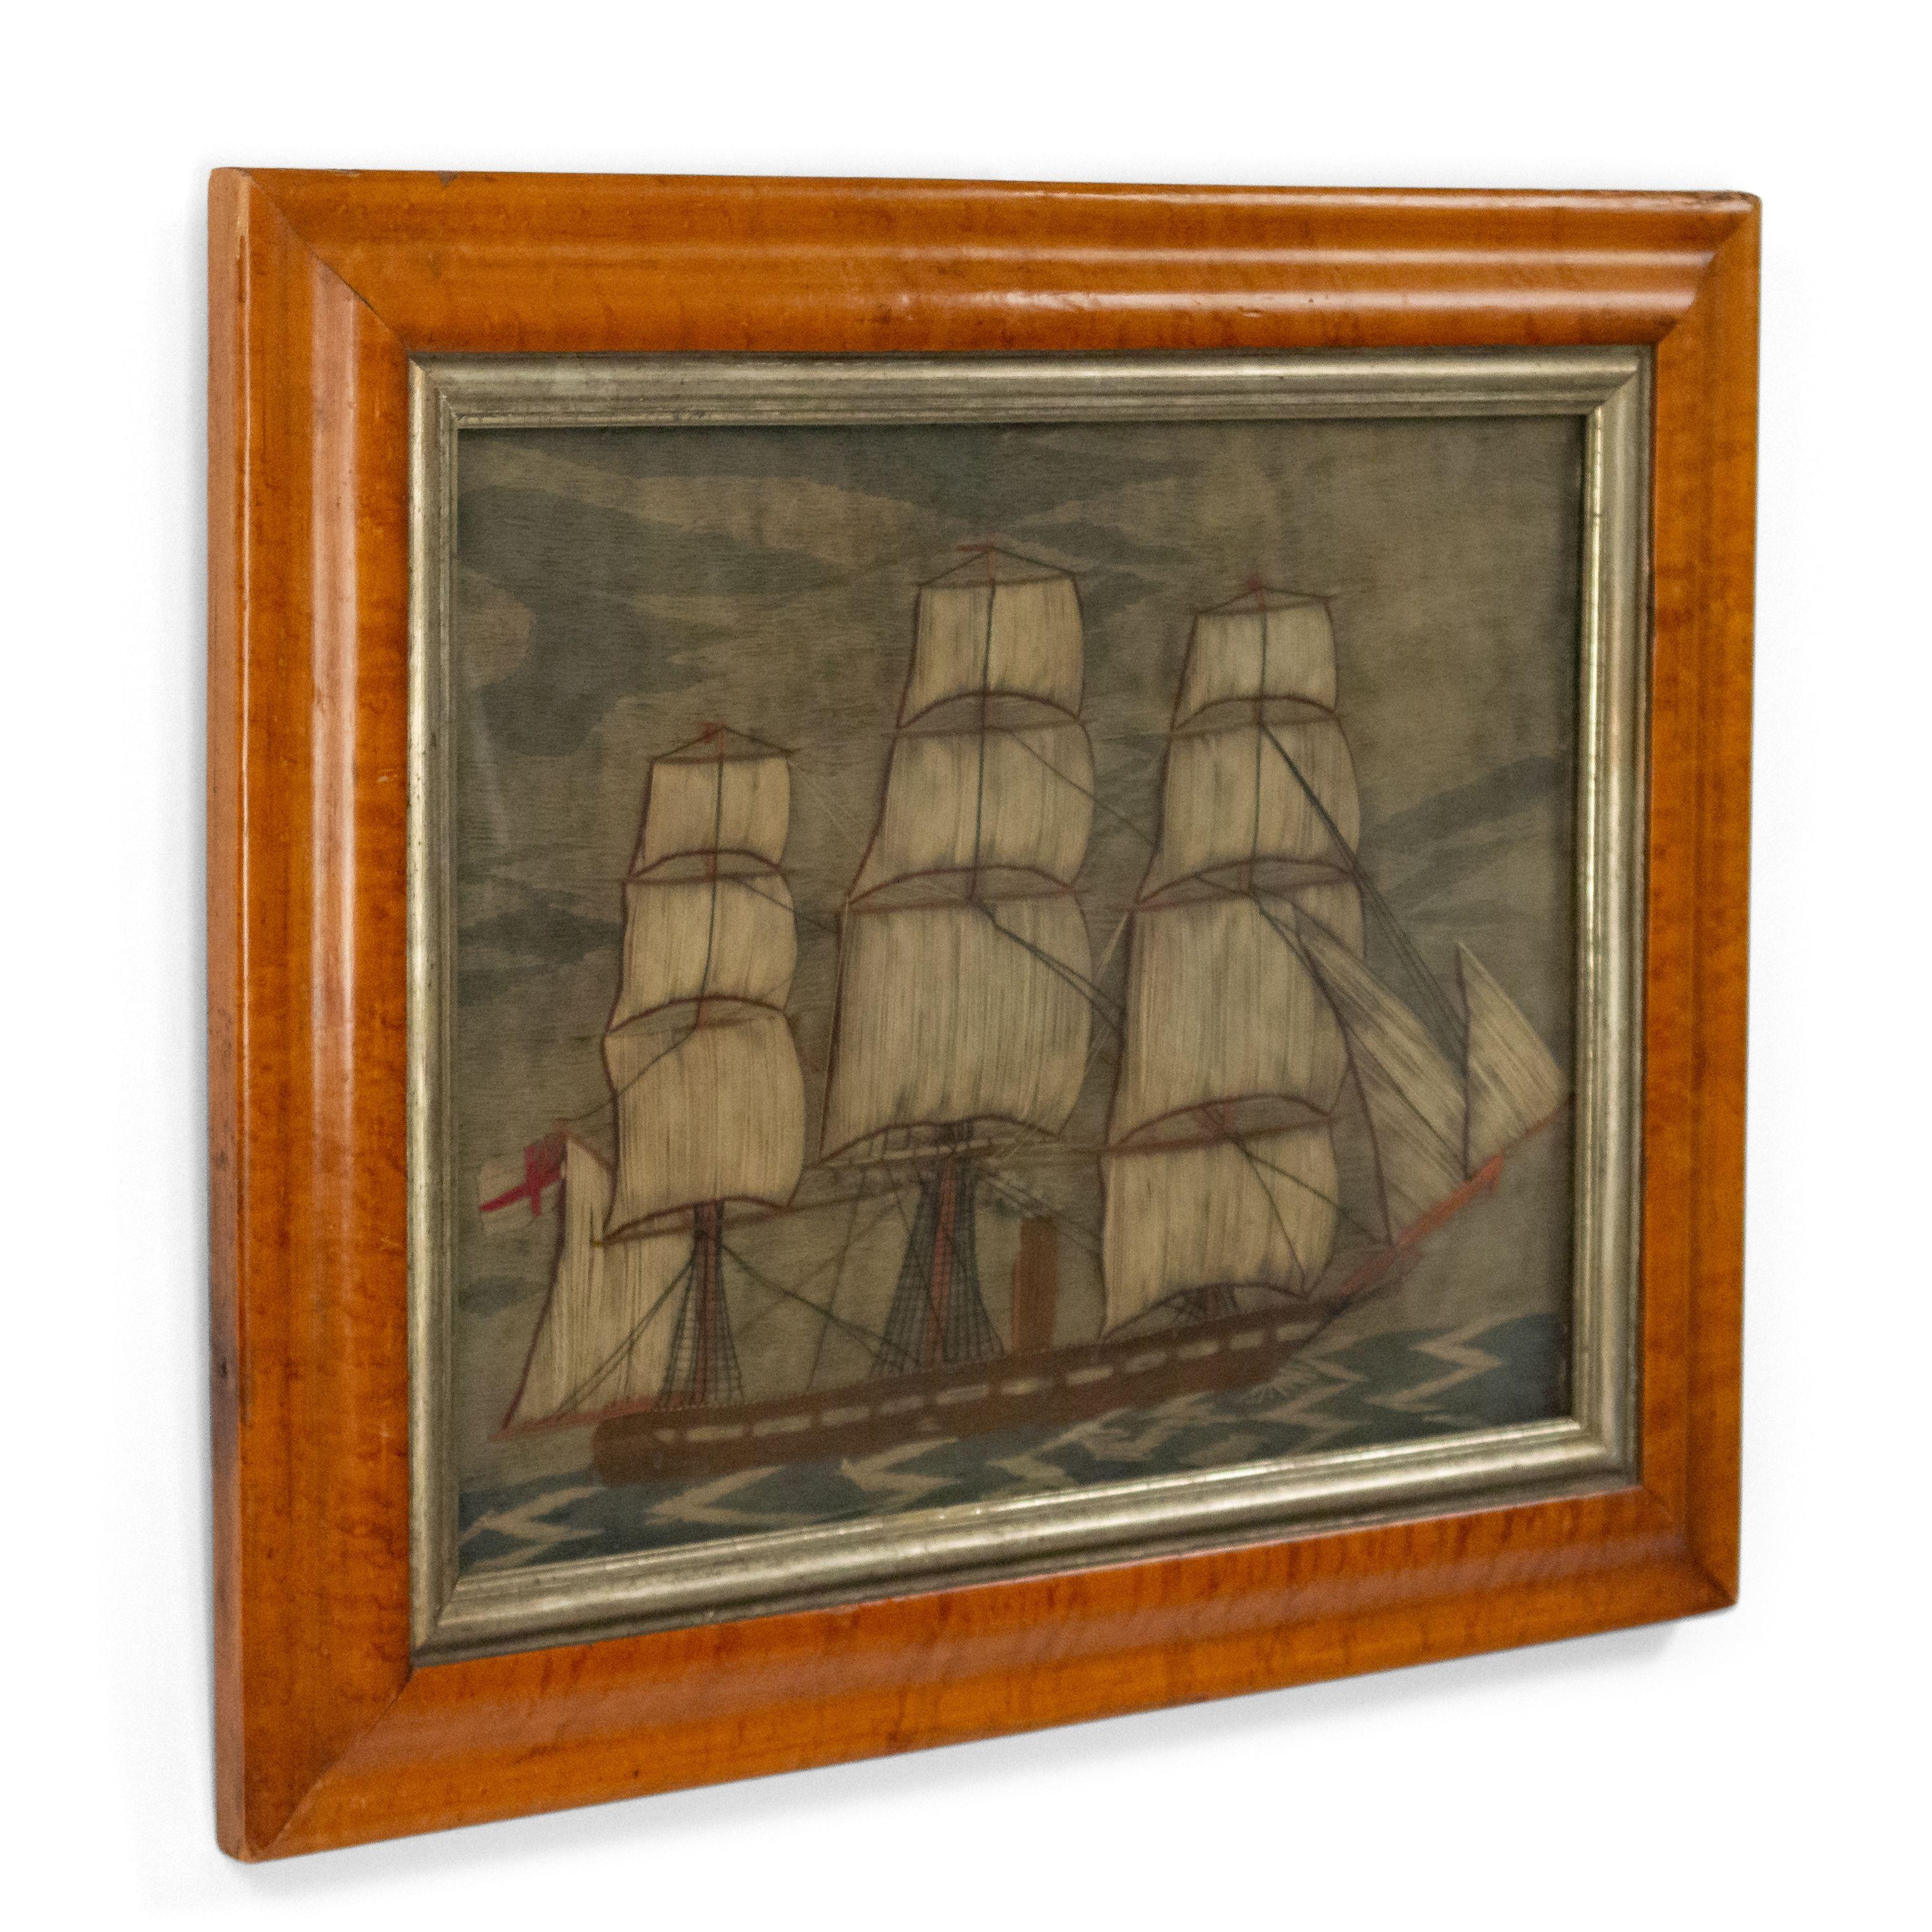 English Country Victorian maple framed embroidered woolwork clipper ship with brown and white hulls.
 